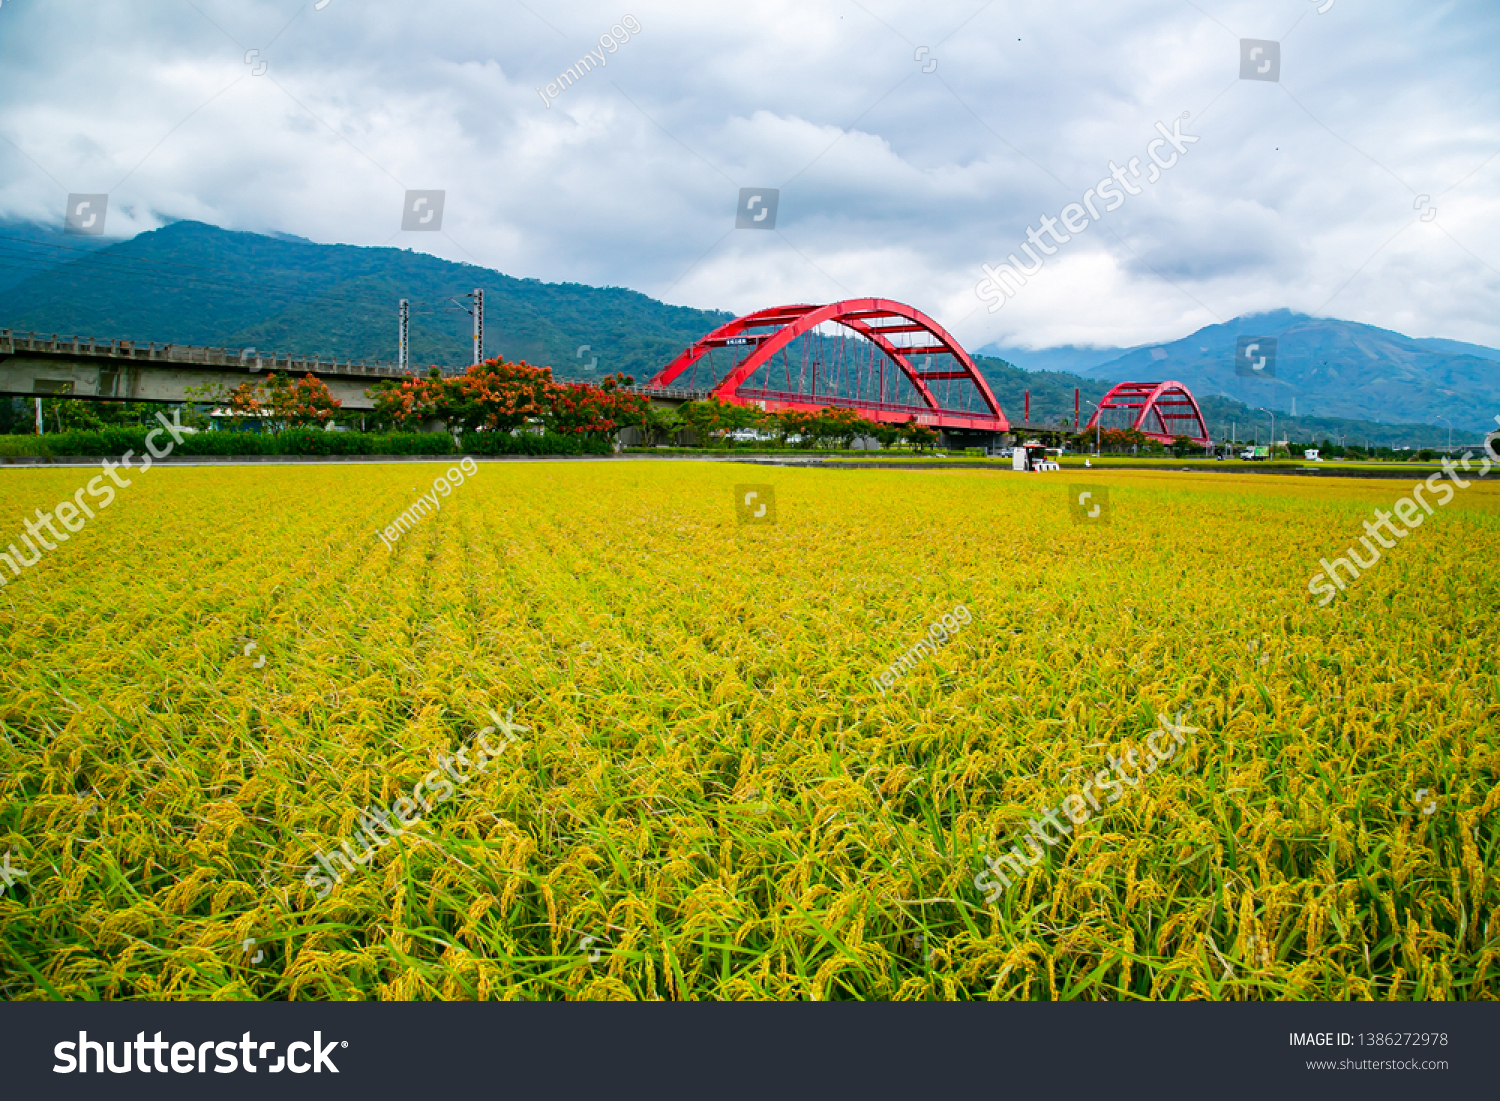 Hualien village and train scenery in eastern Taiwan, the Chinese characters on the bridge are: "Hualien No. 1 Bridge and No. 2 Bridge" #1386272978